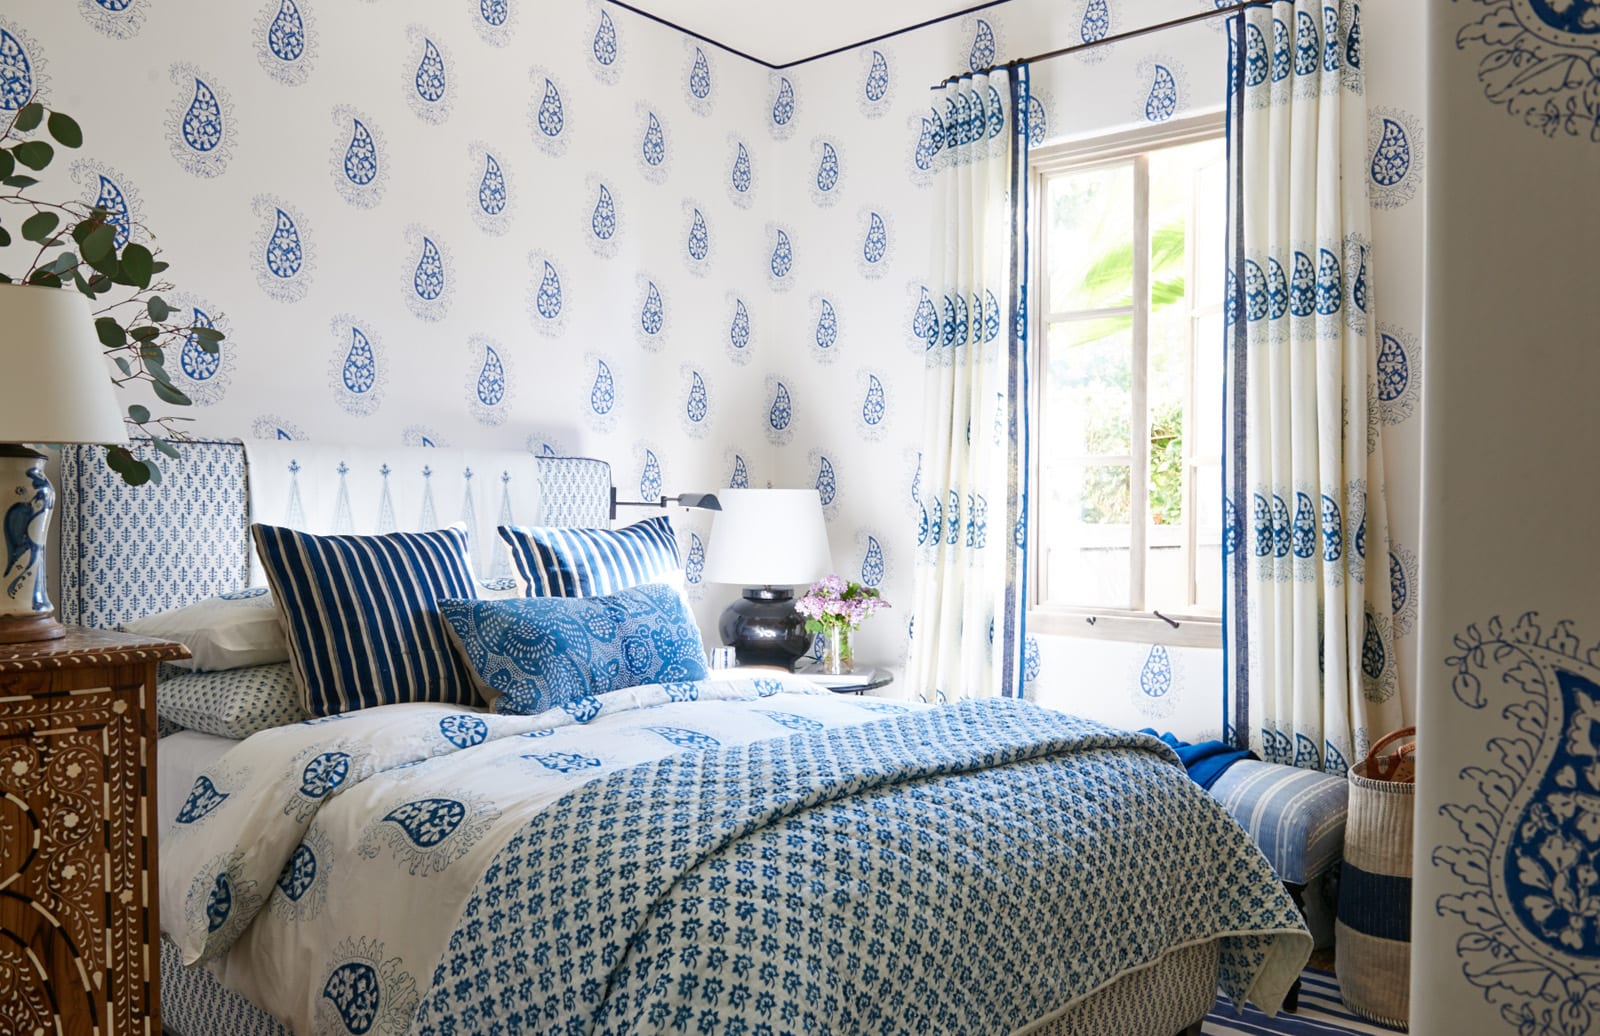 10 Favorites in Blue & White with the fabulous Mark D. Sikes - Amy Neunsinger Photography -bedroom - guest bedroom  - bedroom design - bedroom decor - 